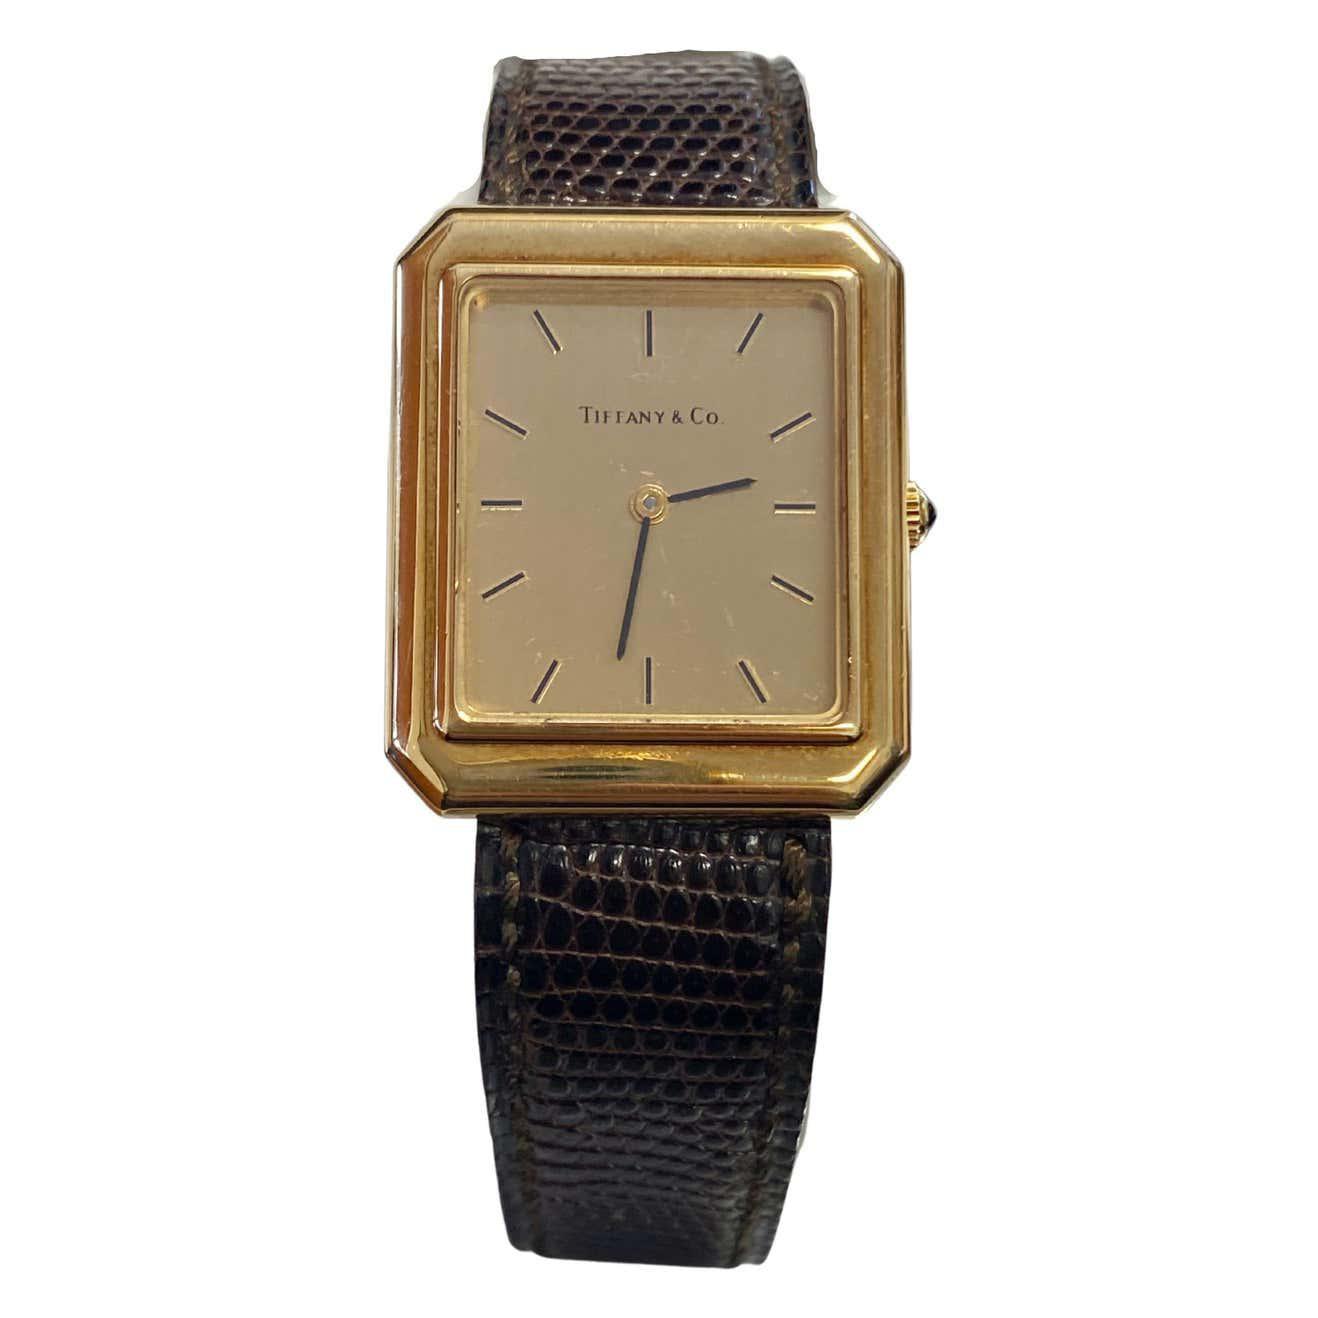 Unisex Tiffany & Co. Rectangular 18k Gold Watch with Leather Strap-ASSAY